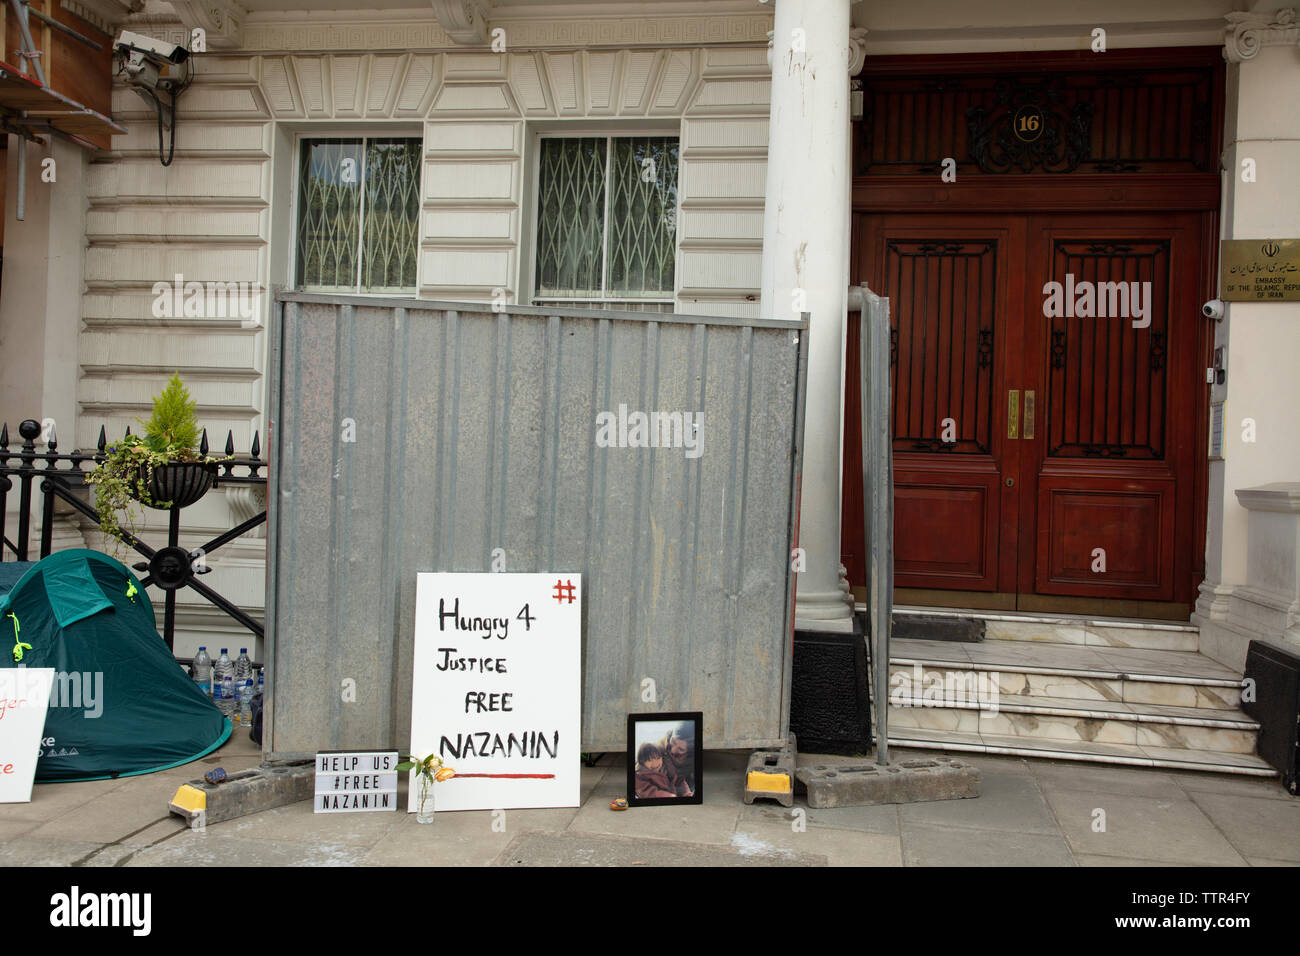 London, UK. 17th June 2019. Tent of Richard Ratcliffe on hunger strike in front of the Iranian embassy in London in protest of the detention of his wife Nazanin Zaghari in Iran over spying allegations. Staff of the embassy and builders have placed iron boards squeezing the protesters' space. Credit: Joe Kuis / Alamy Stock Photo